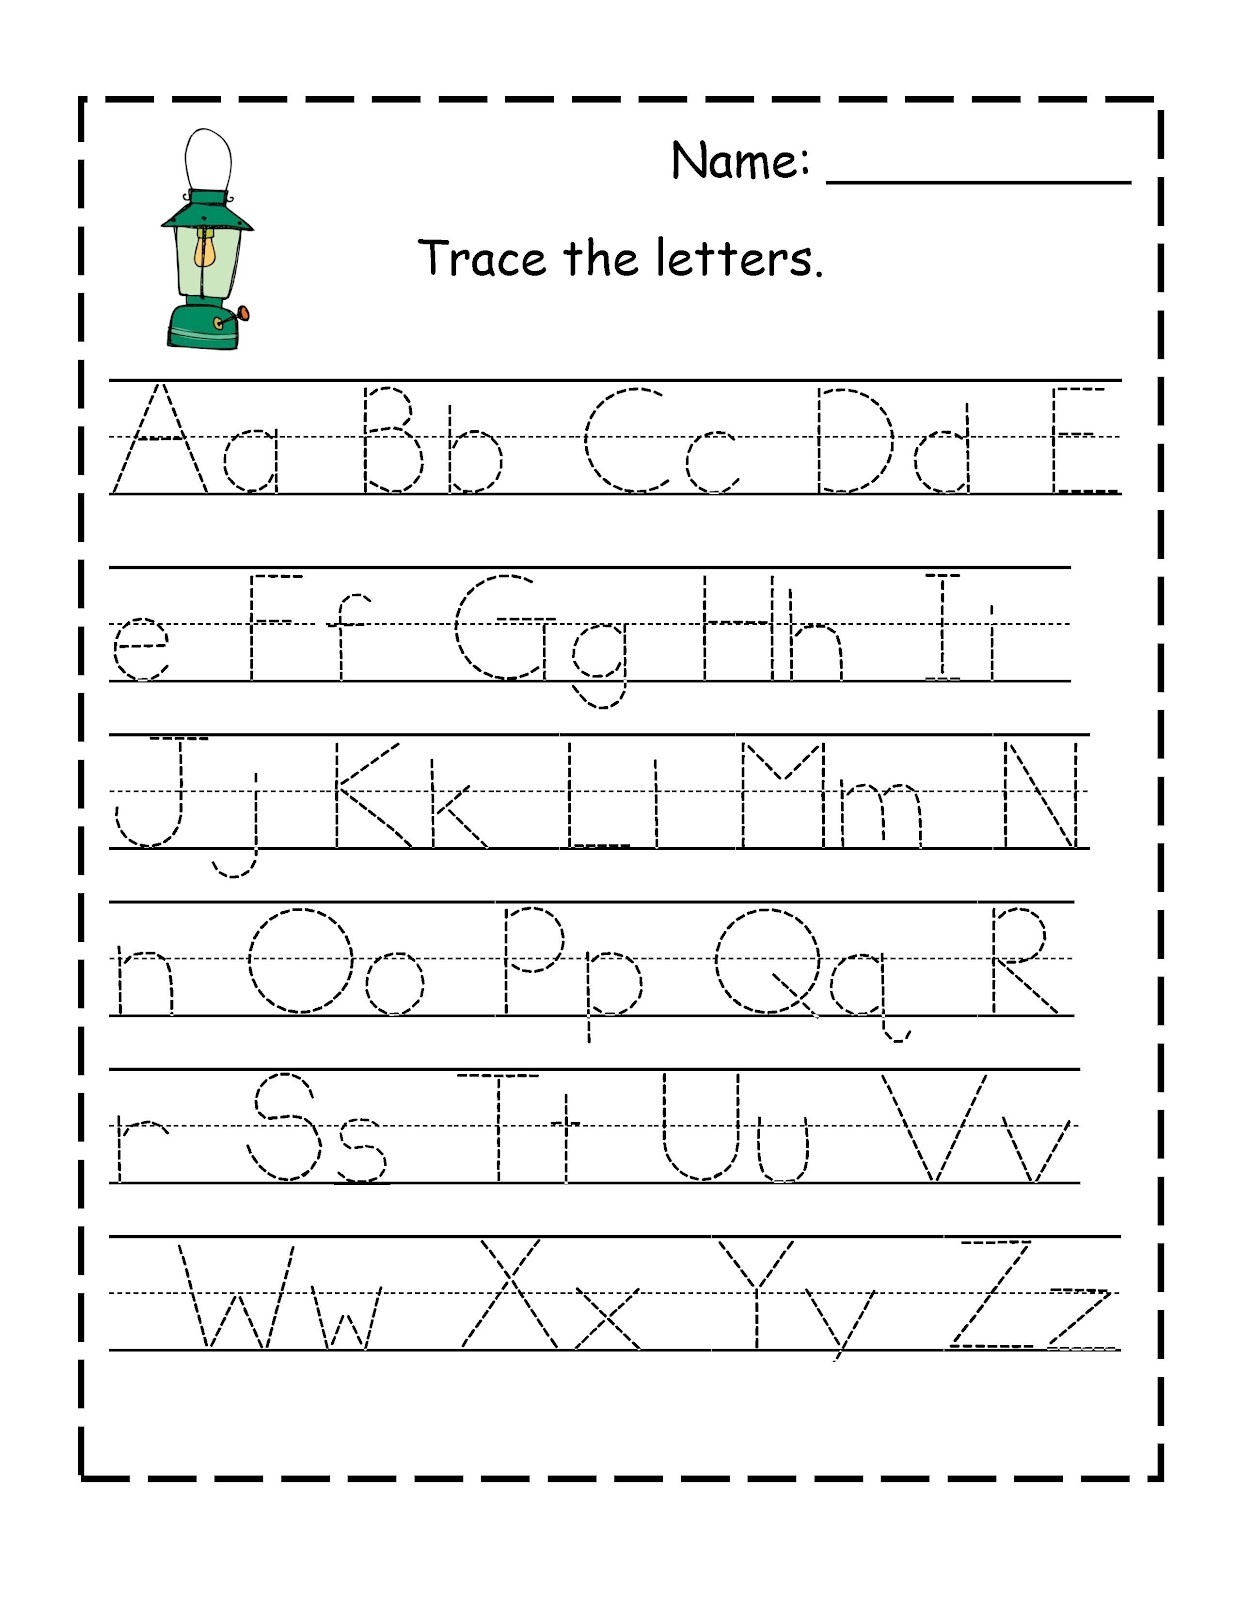 Printable Abc Worksheets Free | Activity Shelter - Free Printable Abc Worksheets